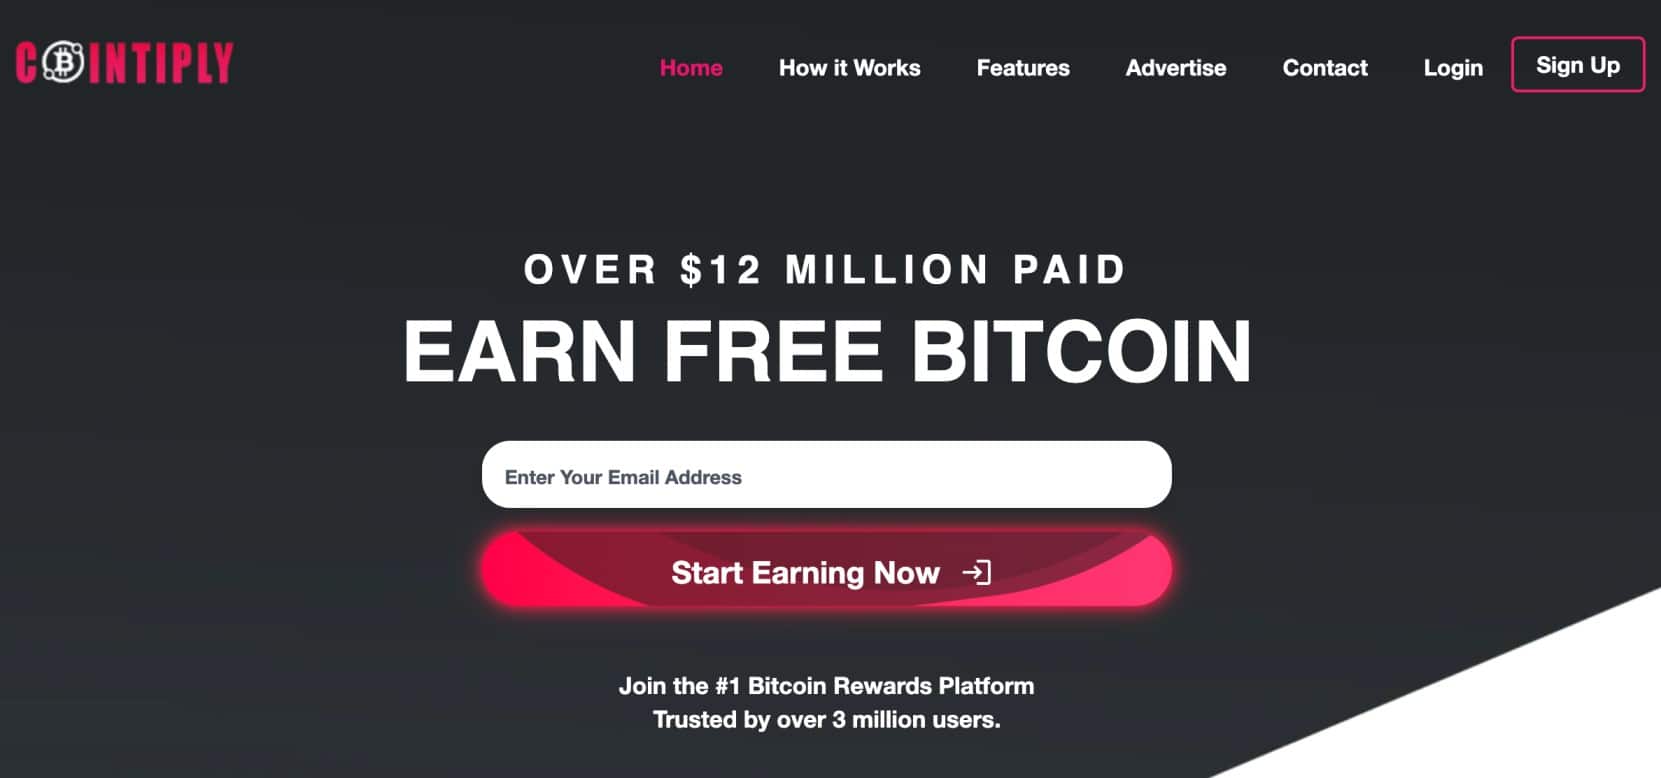 Earn bitcoin by answering questions and completing simple tasks - Springwise